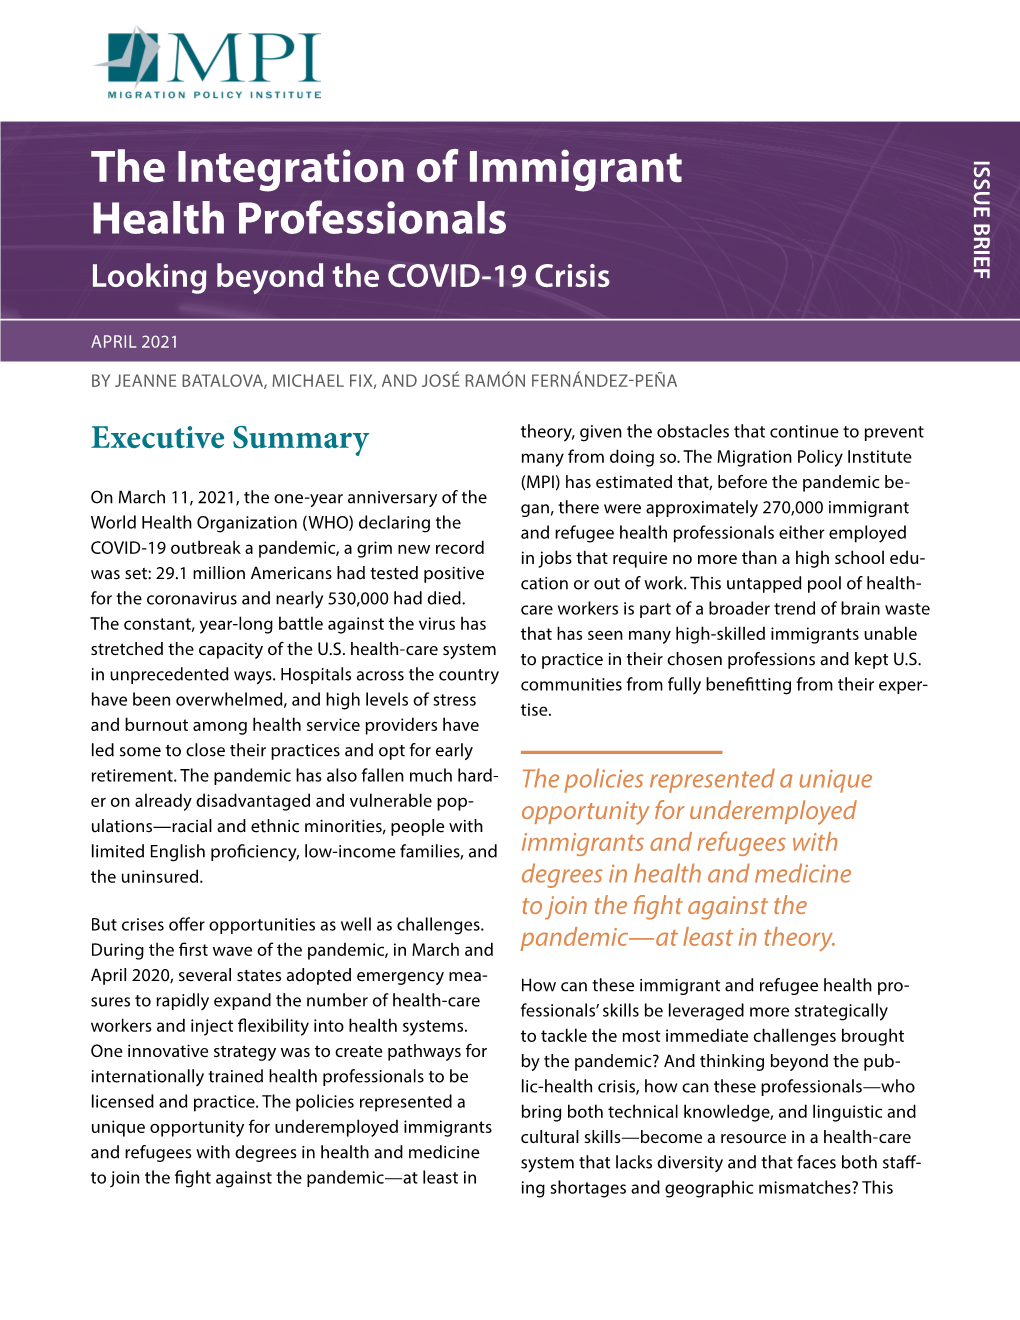 The Integration of Immigrant Health Professionals